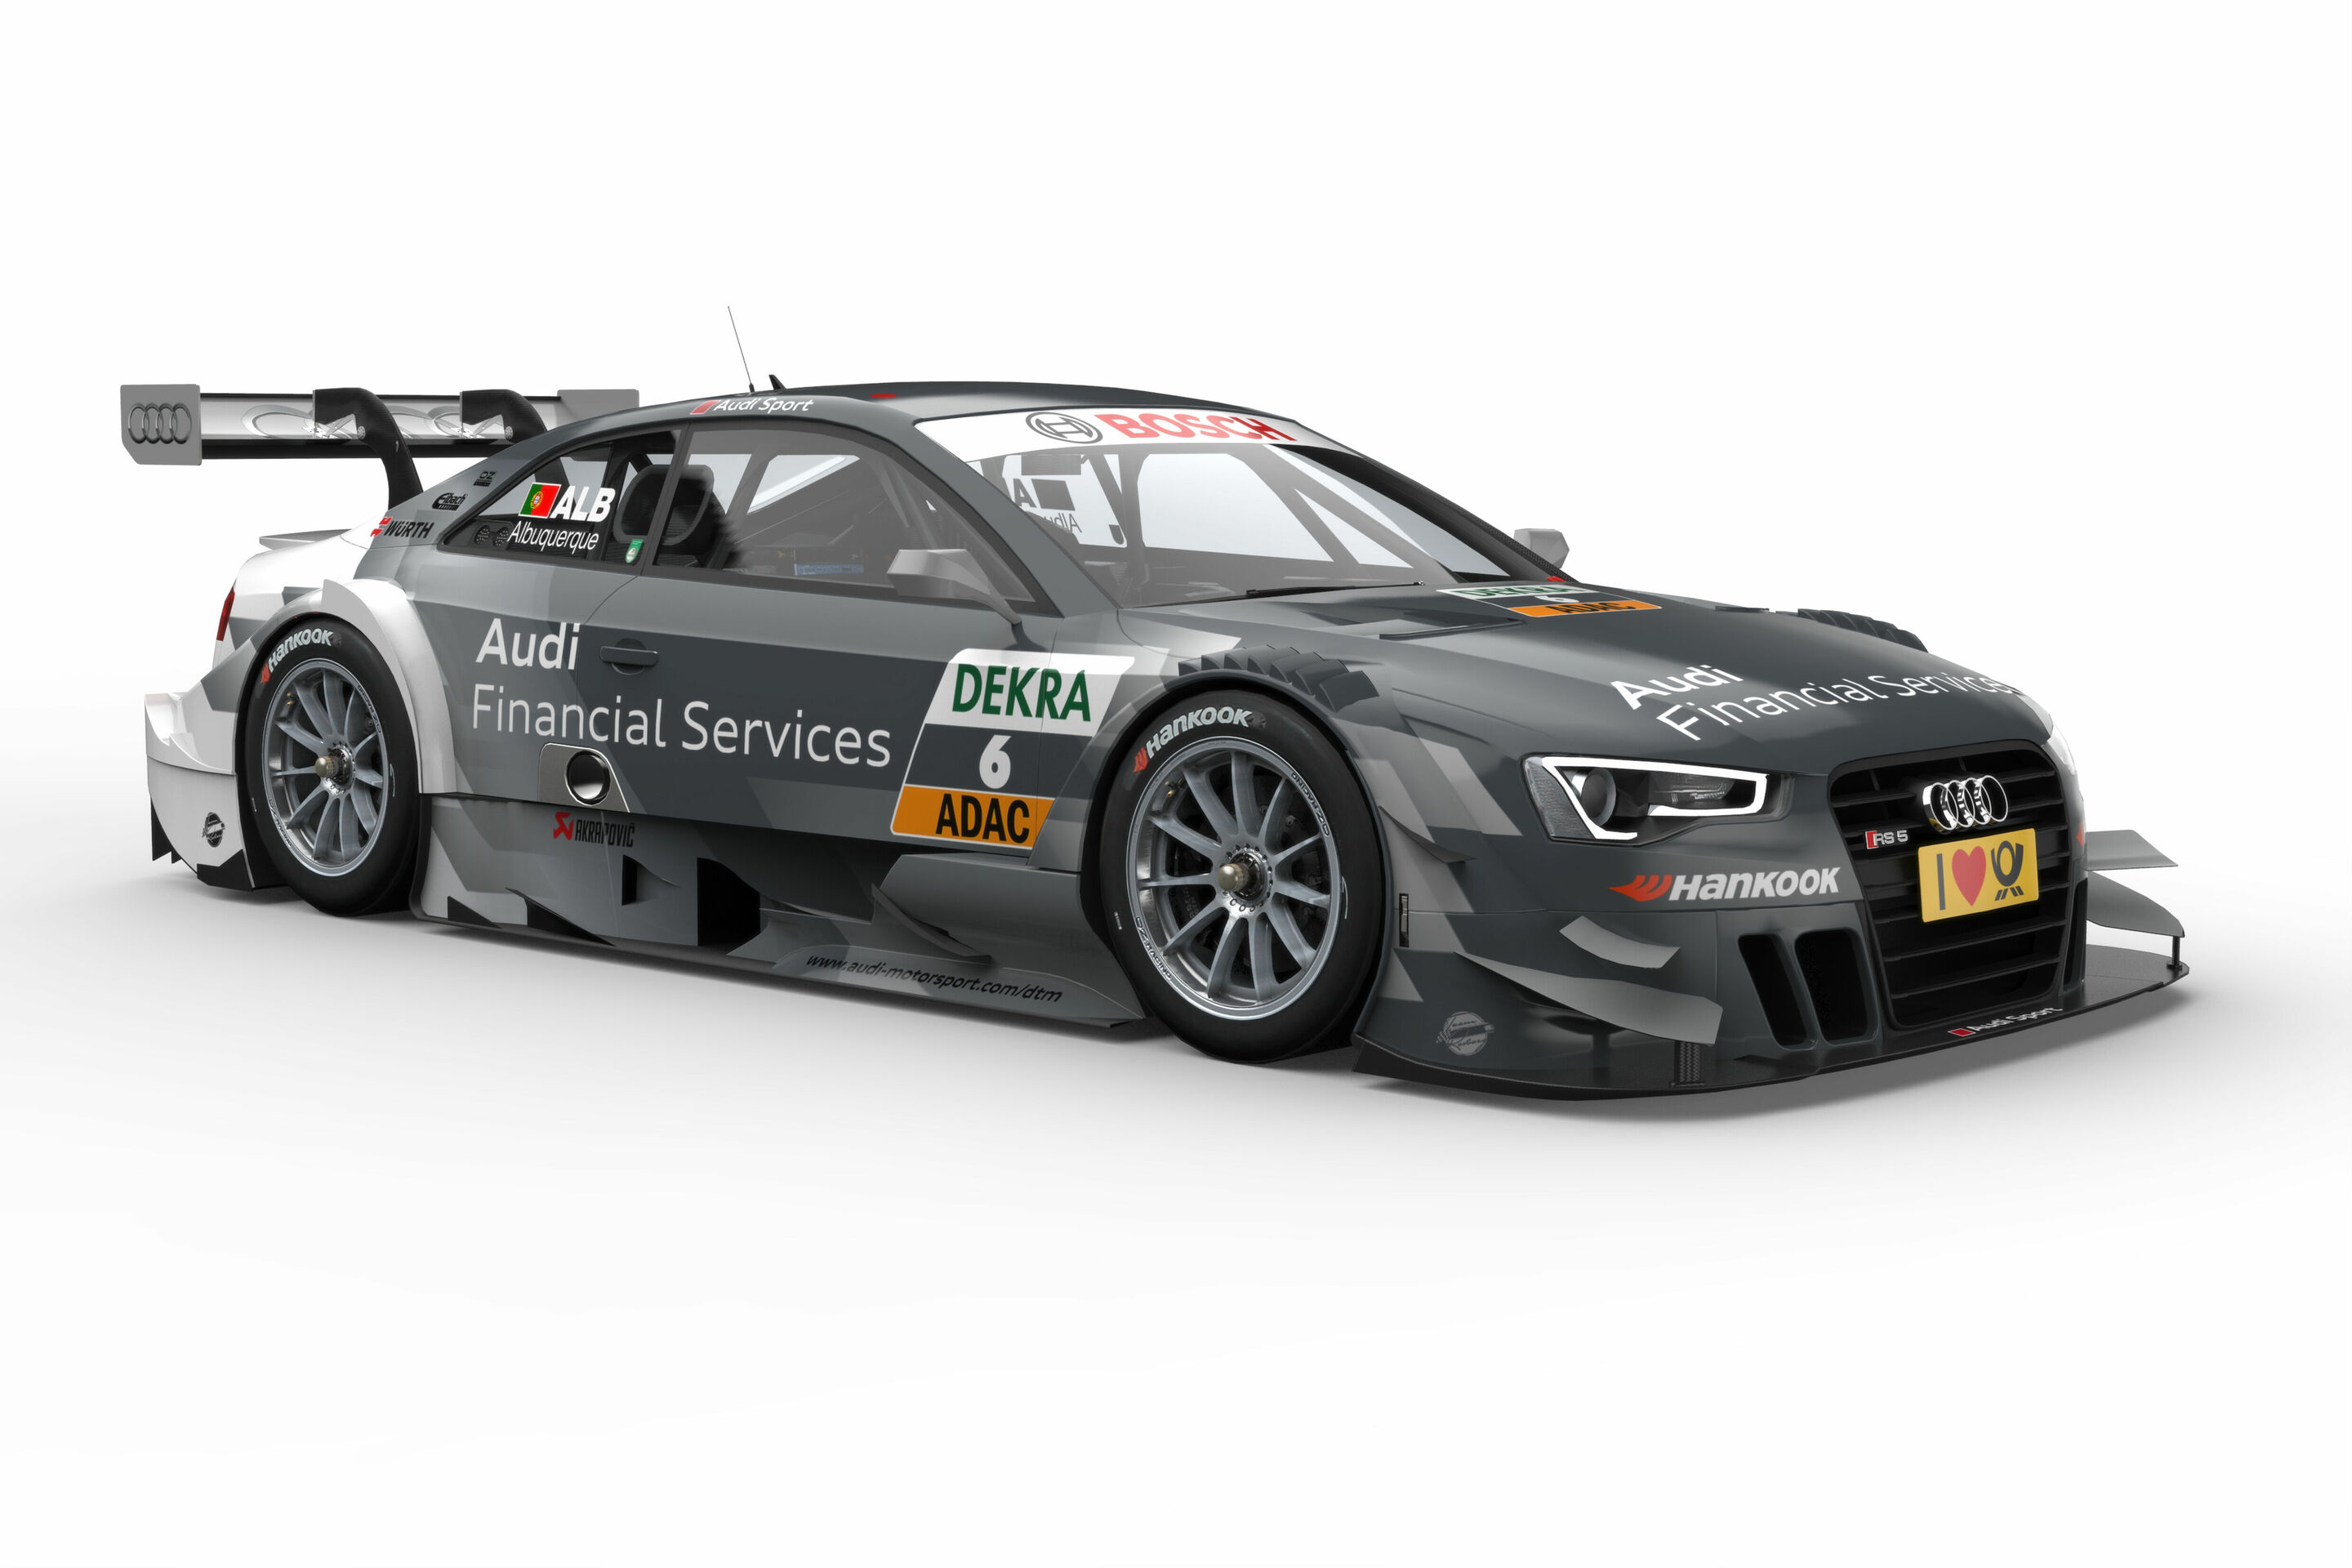 Audi starts into DTM with strong partners